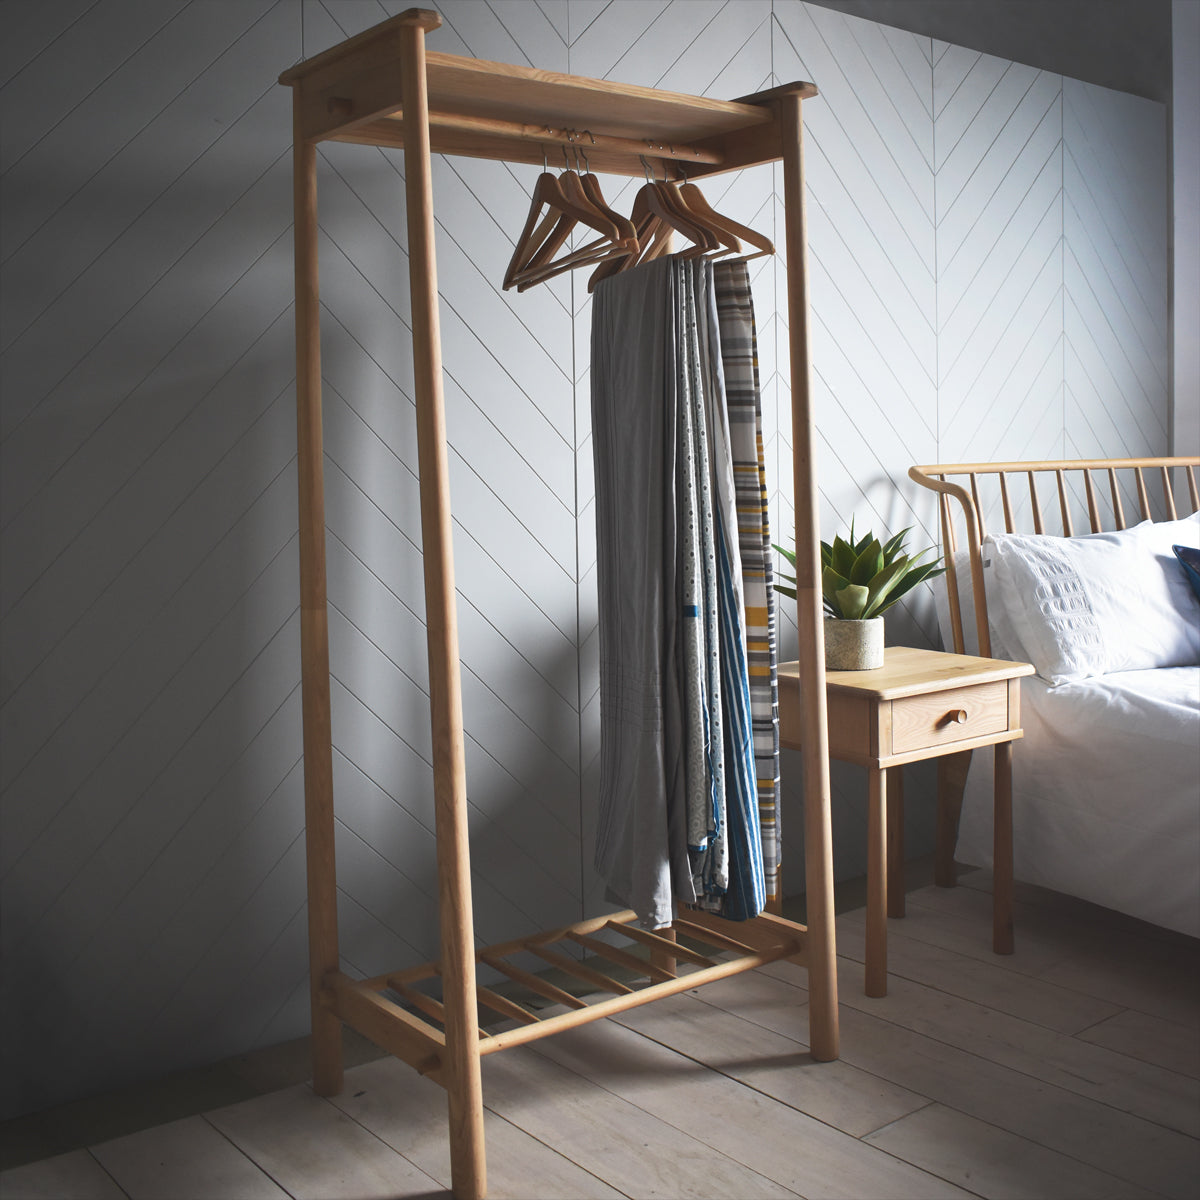 Load image into Gallery viewer, A home furniture piece, the Tigley Open Wardrobe from Kikiathome.co.uk, enhances the interior decor of a bedroom with a bed.
